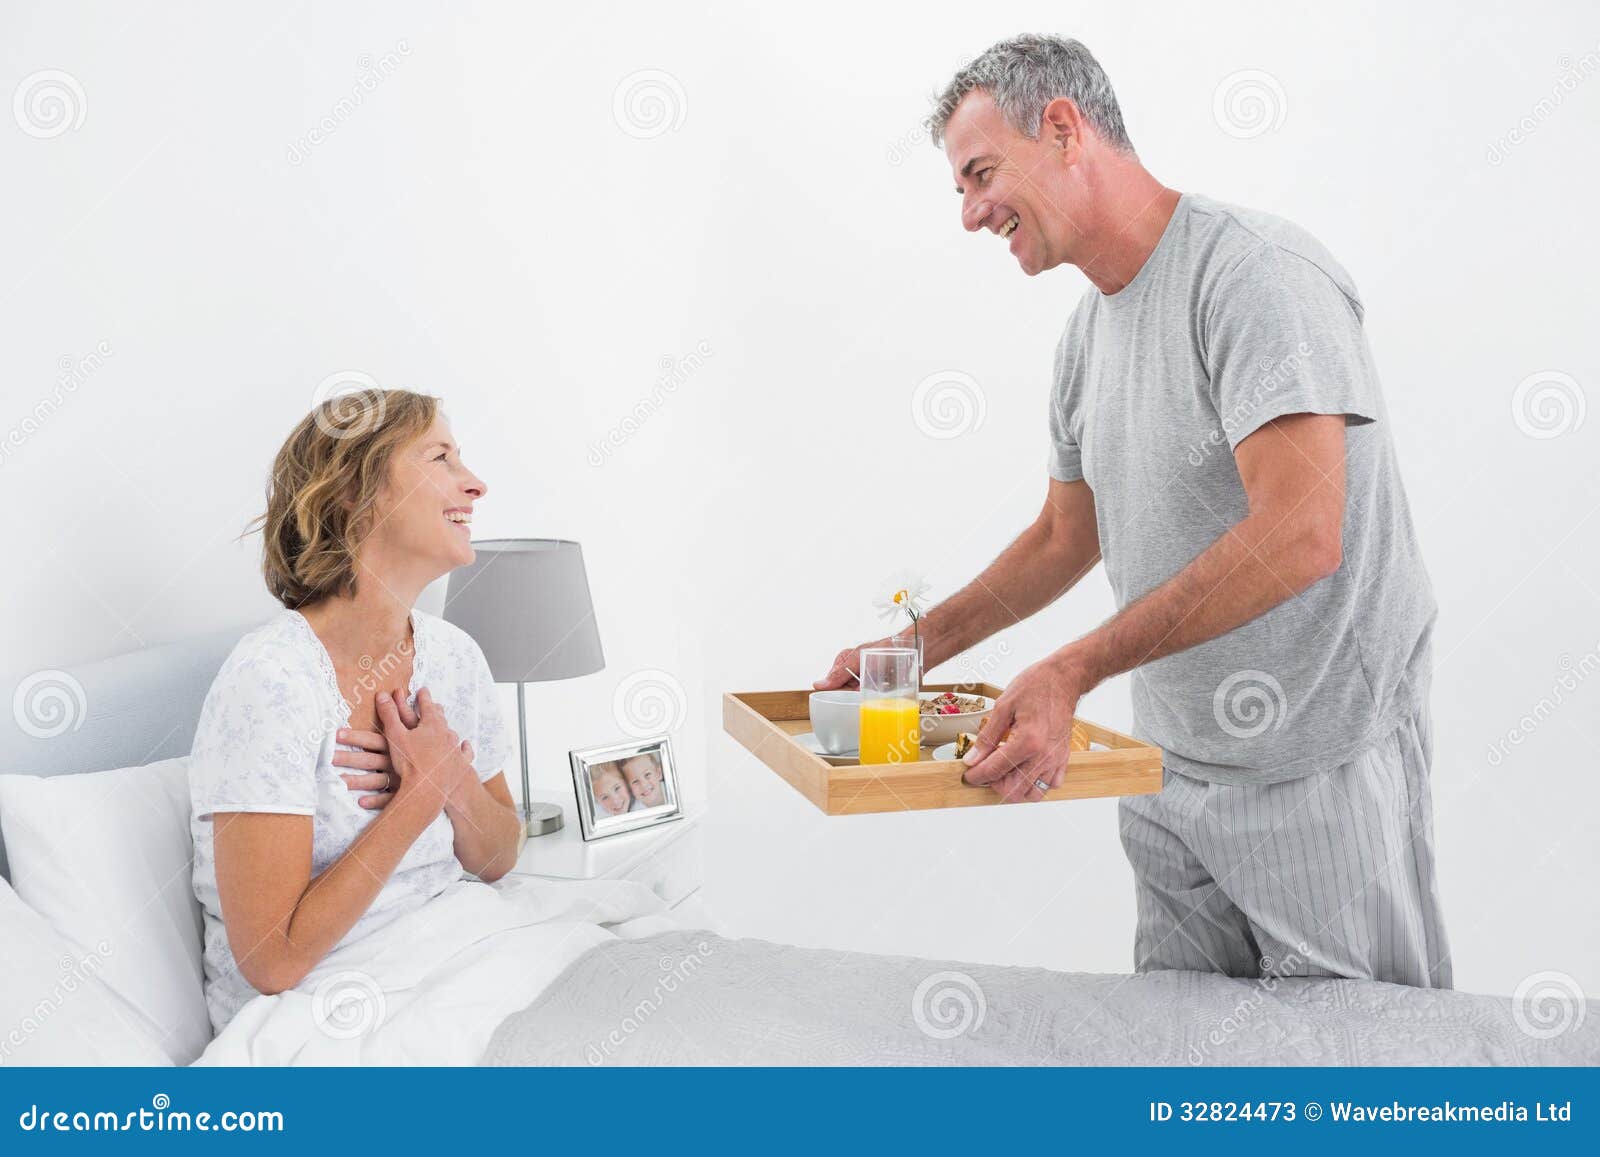 Loving Husband Bringing Breakfast In Bed To Wife Stock Photos